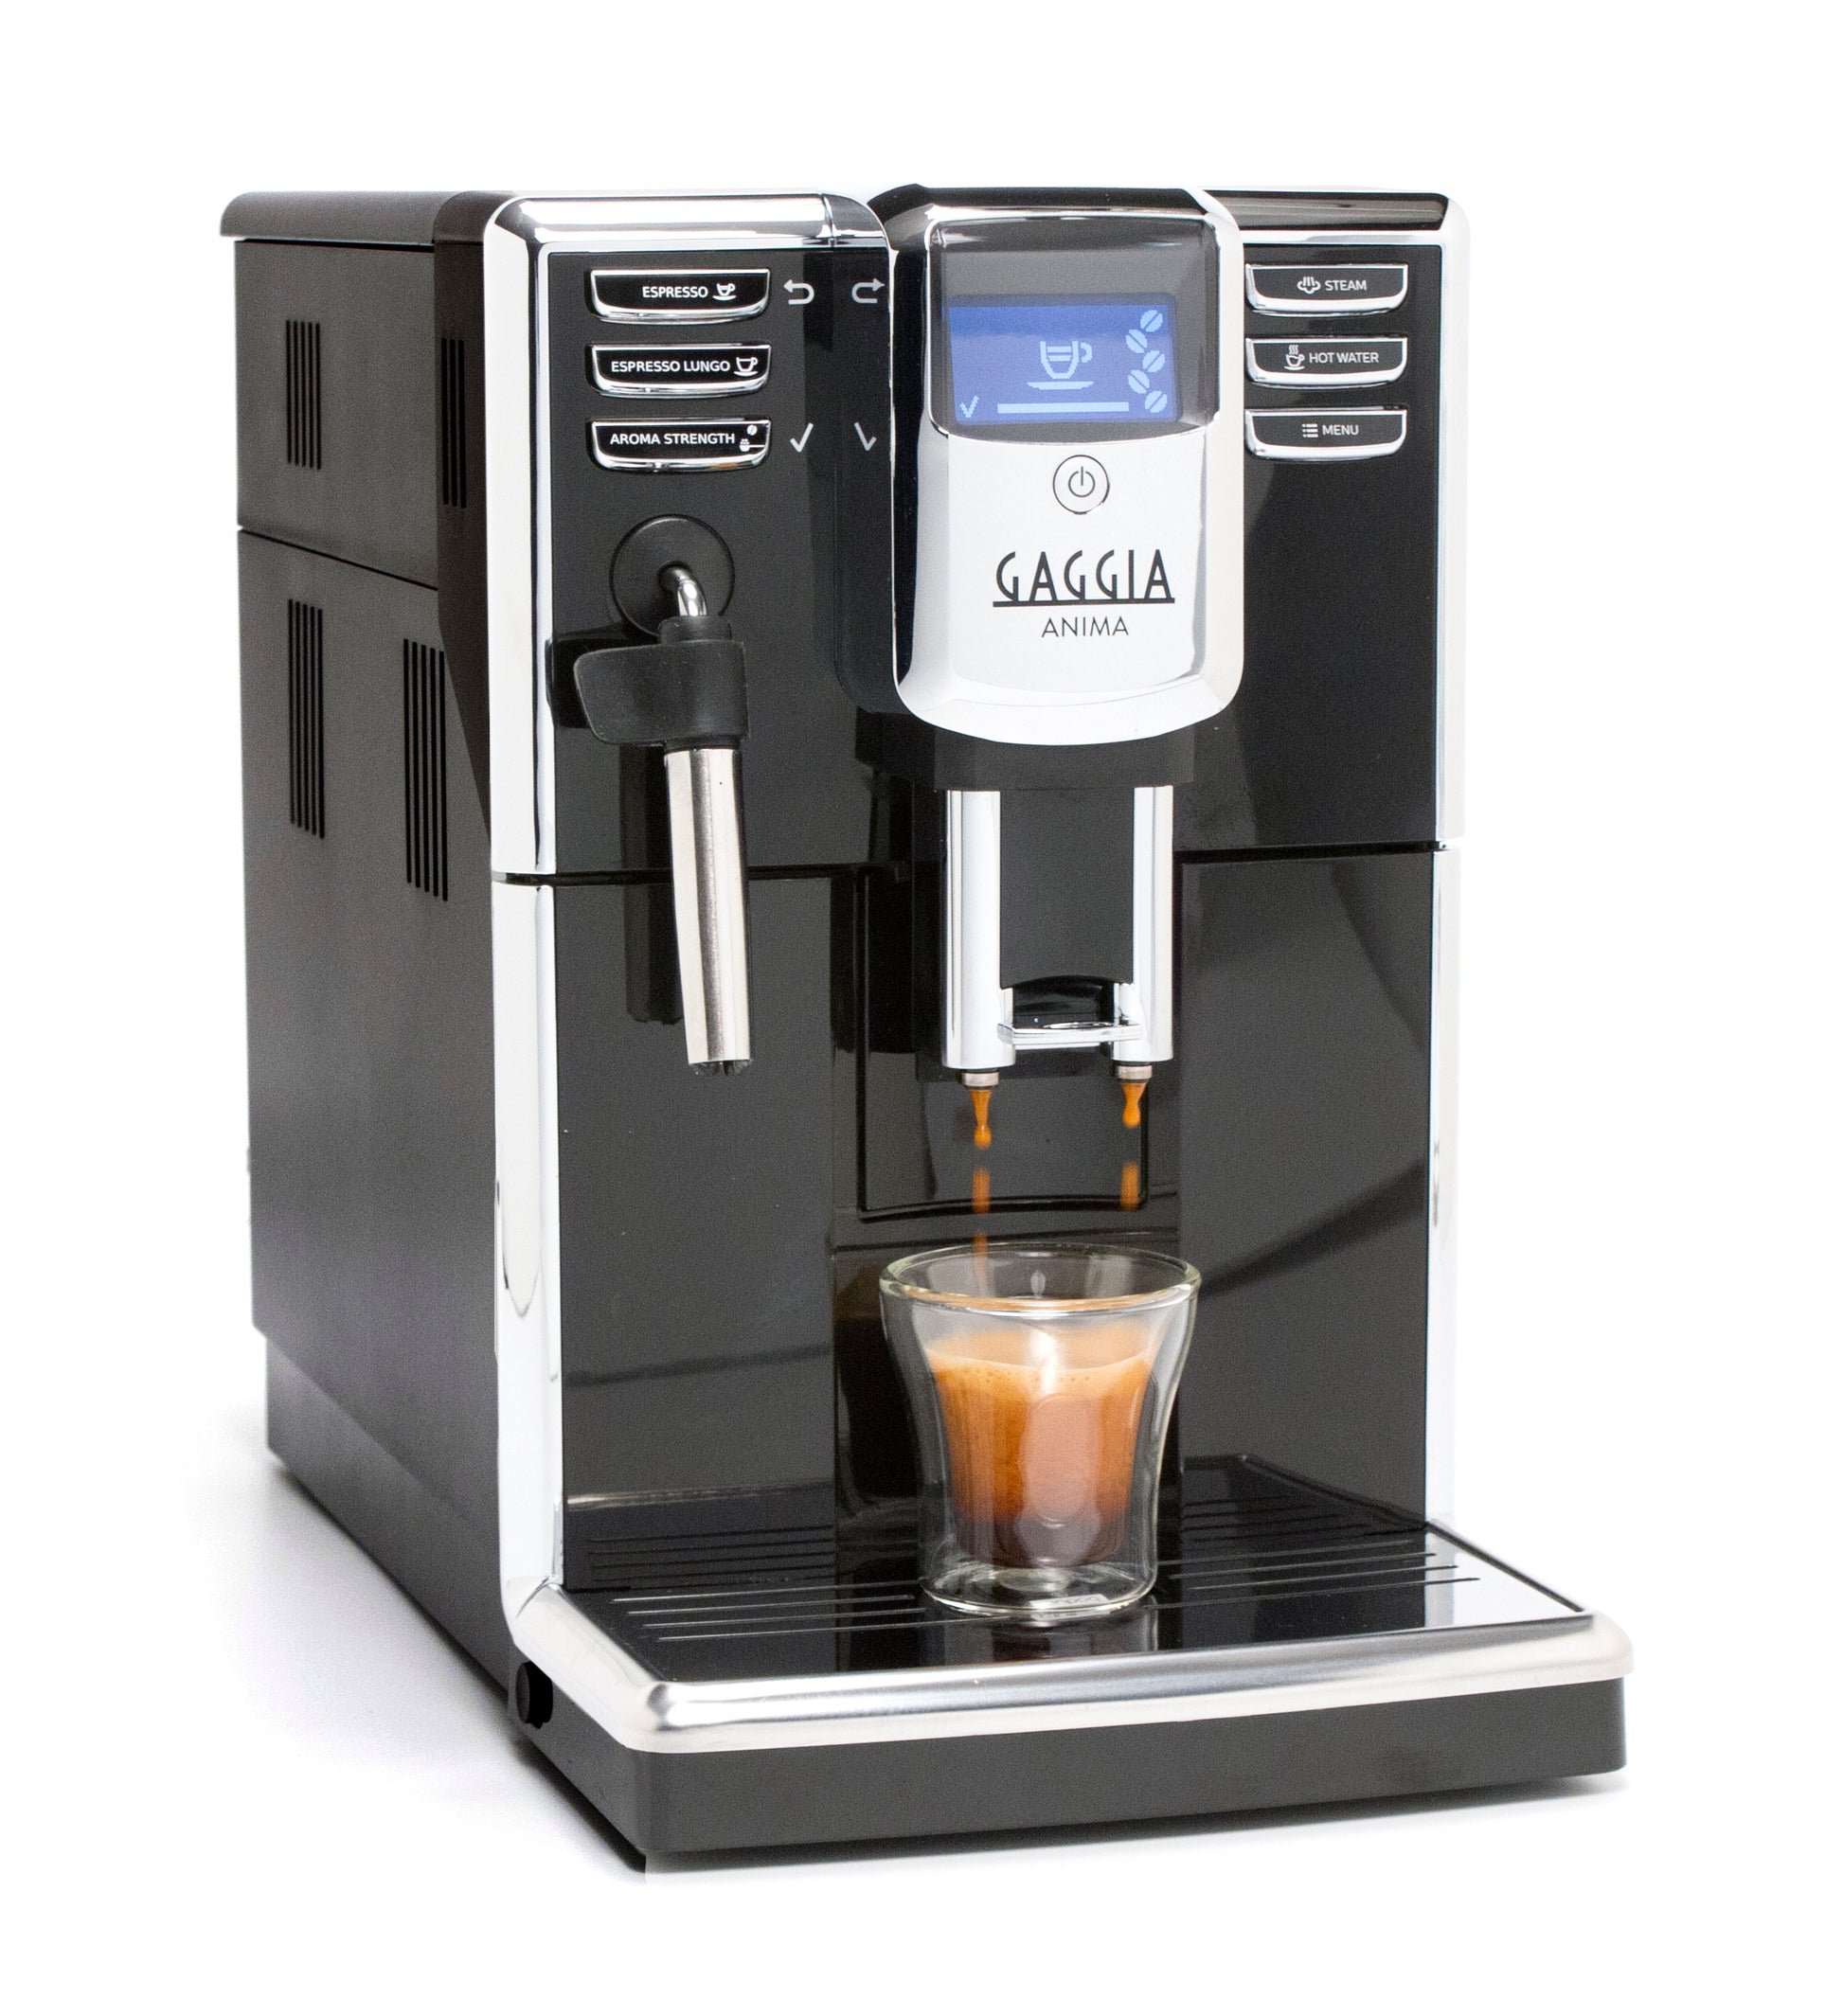 How to Use Pre-Ground Coffee in Super Automatic Espresso Machines 